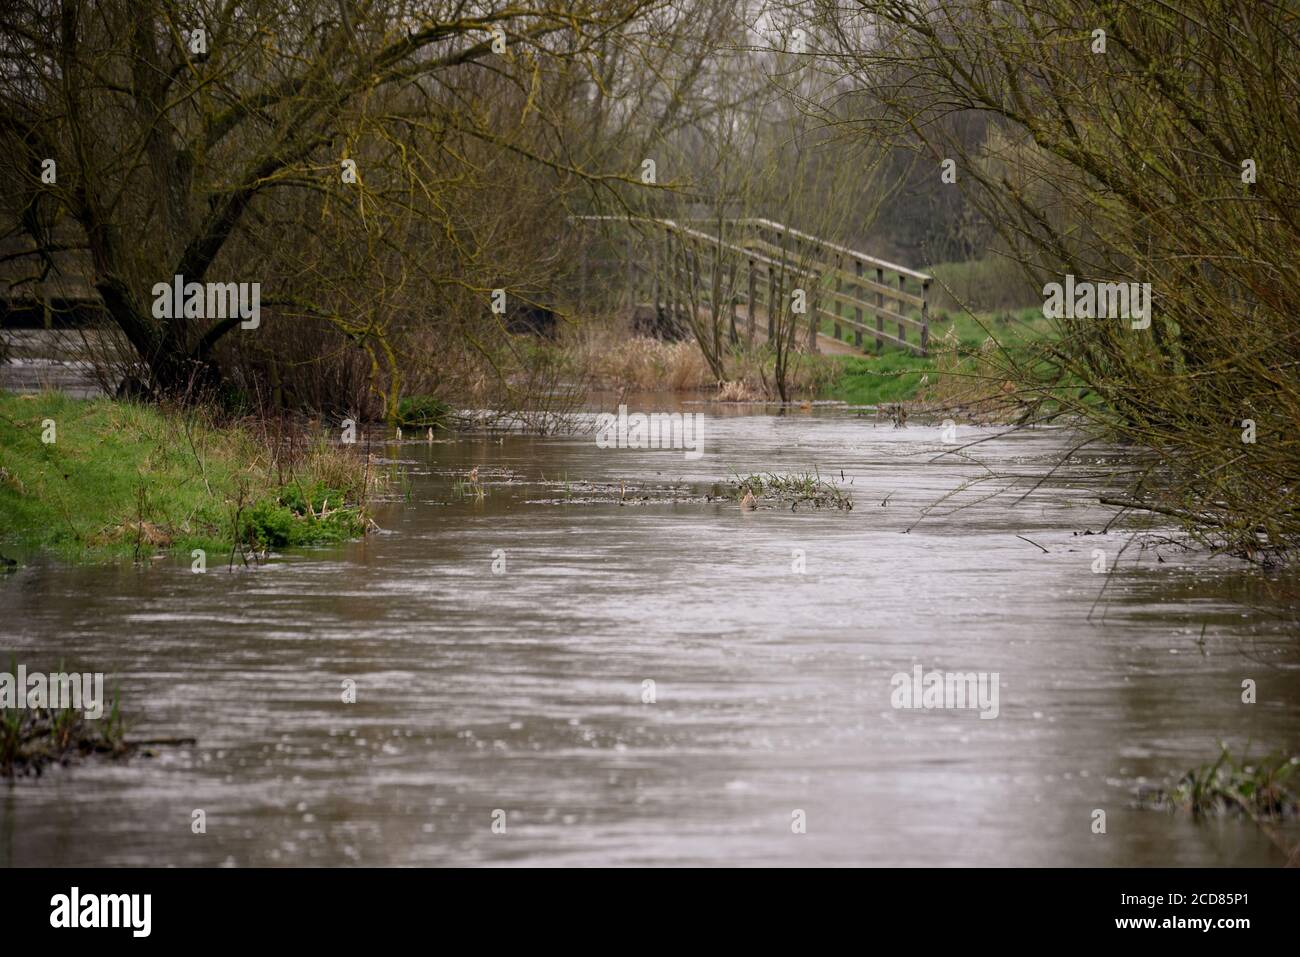 The river Blackwater is full and flowing strongly after a large amount of rain, in this photo taken on an overcast spring day. Stock Photo